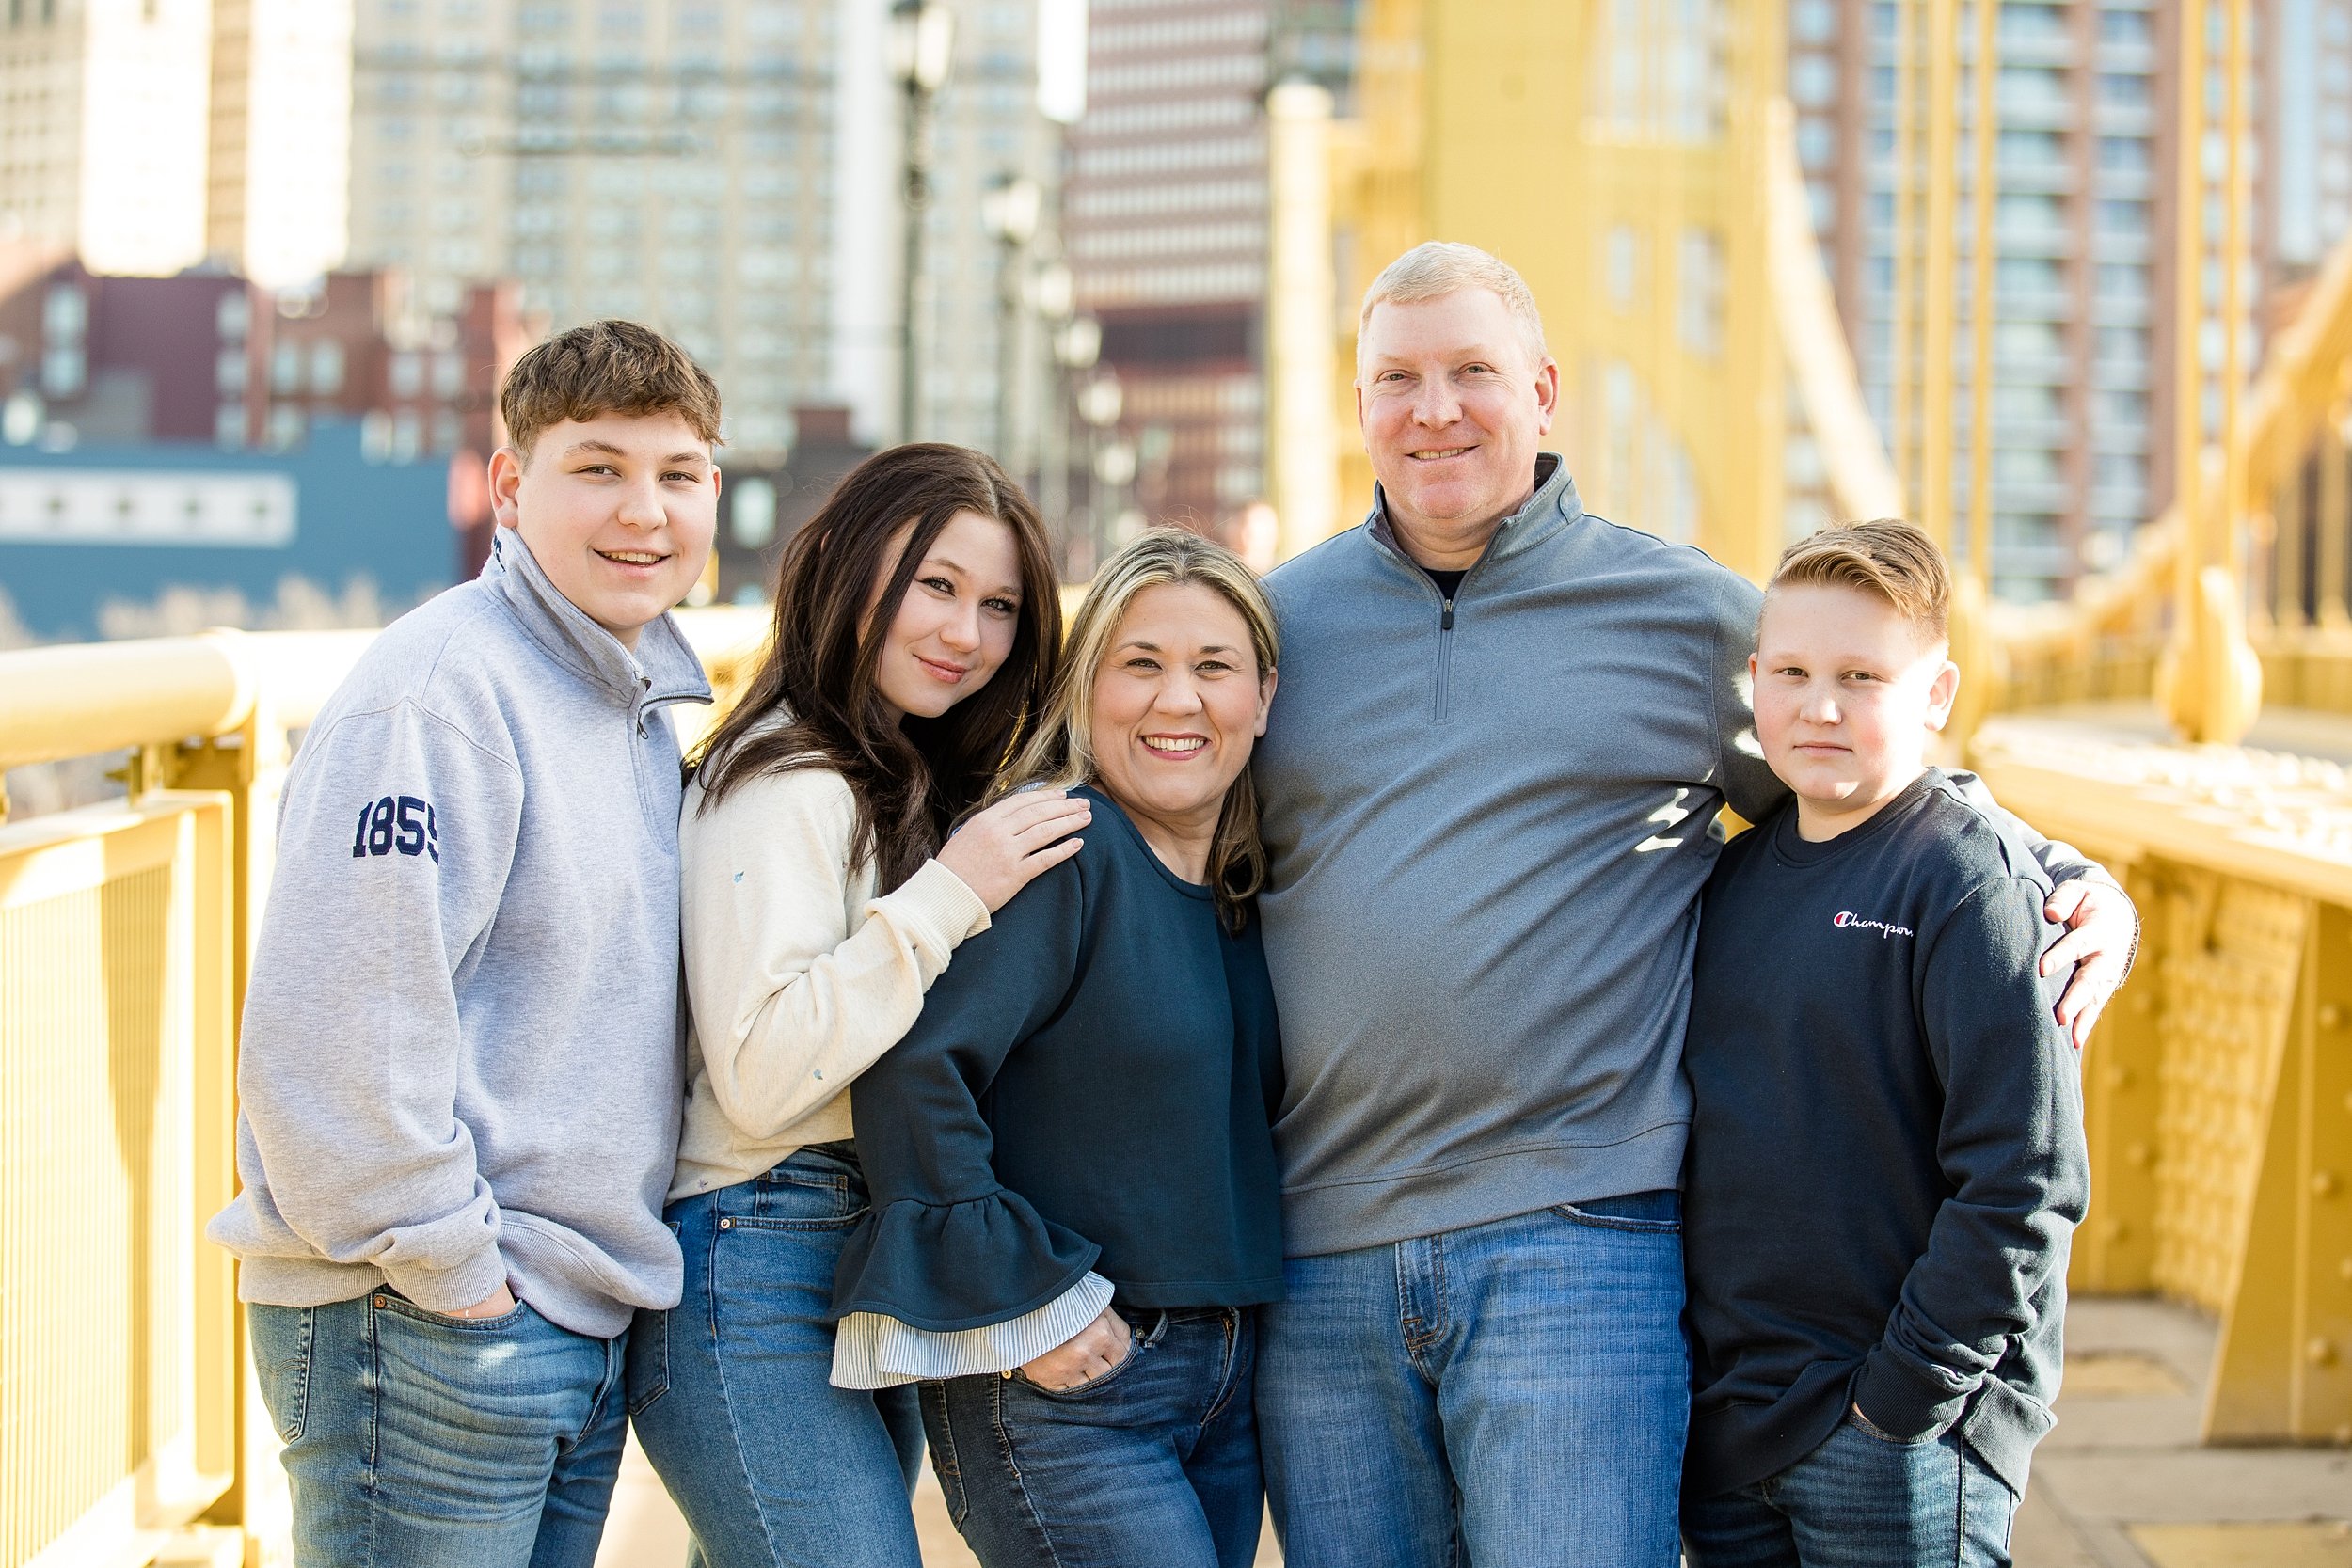 pittsburgh family photographer, pittsburgh family photos, cranberry township family photographer, zelienople family photographer, downtown pittsburgh family photos